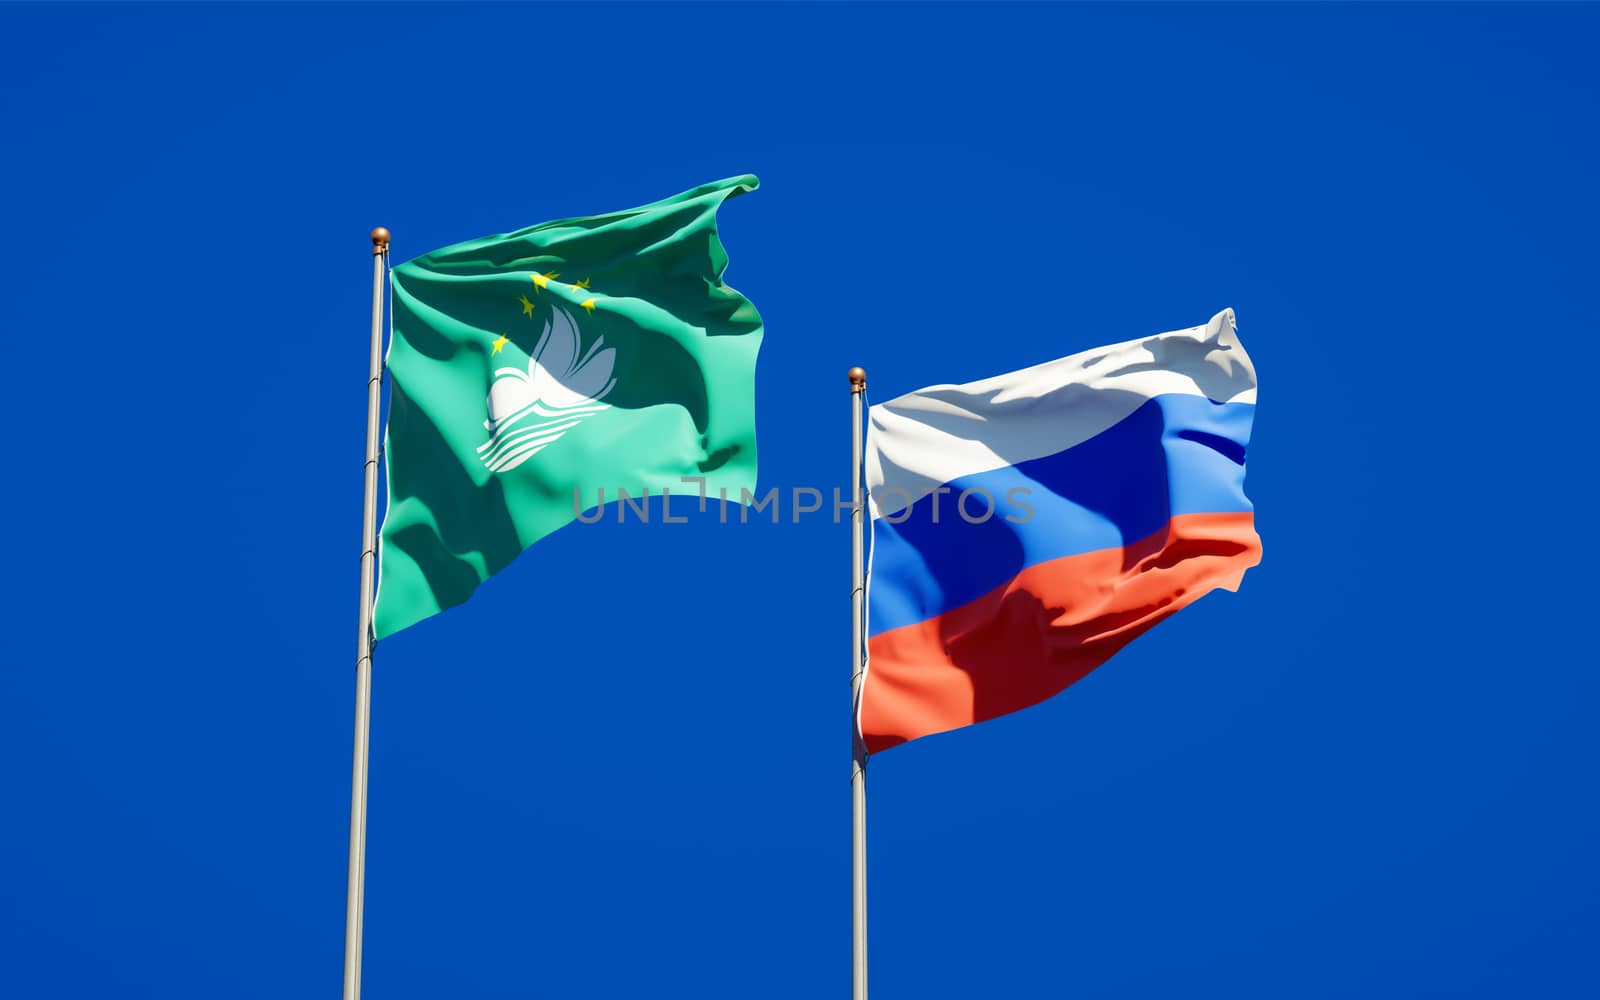 Beautiful national state flags of Macao and Russia together at the sky background. 3D artwork concept. 